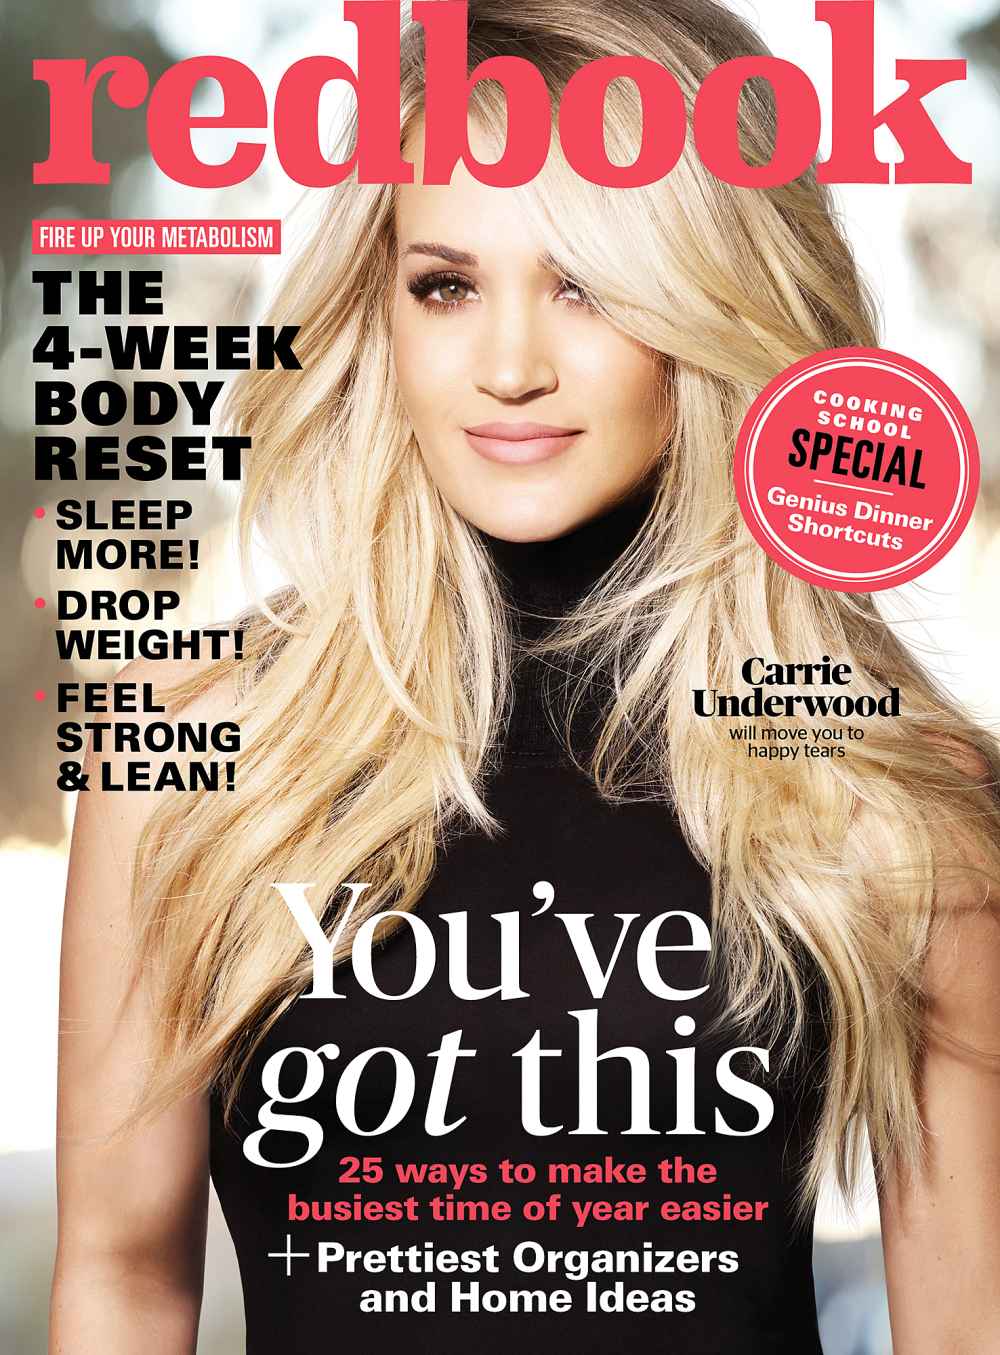 Carrie Underwood Redbook Cover Motherhood Controversial Comment